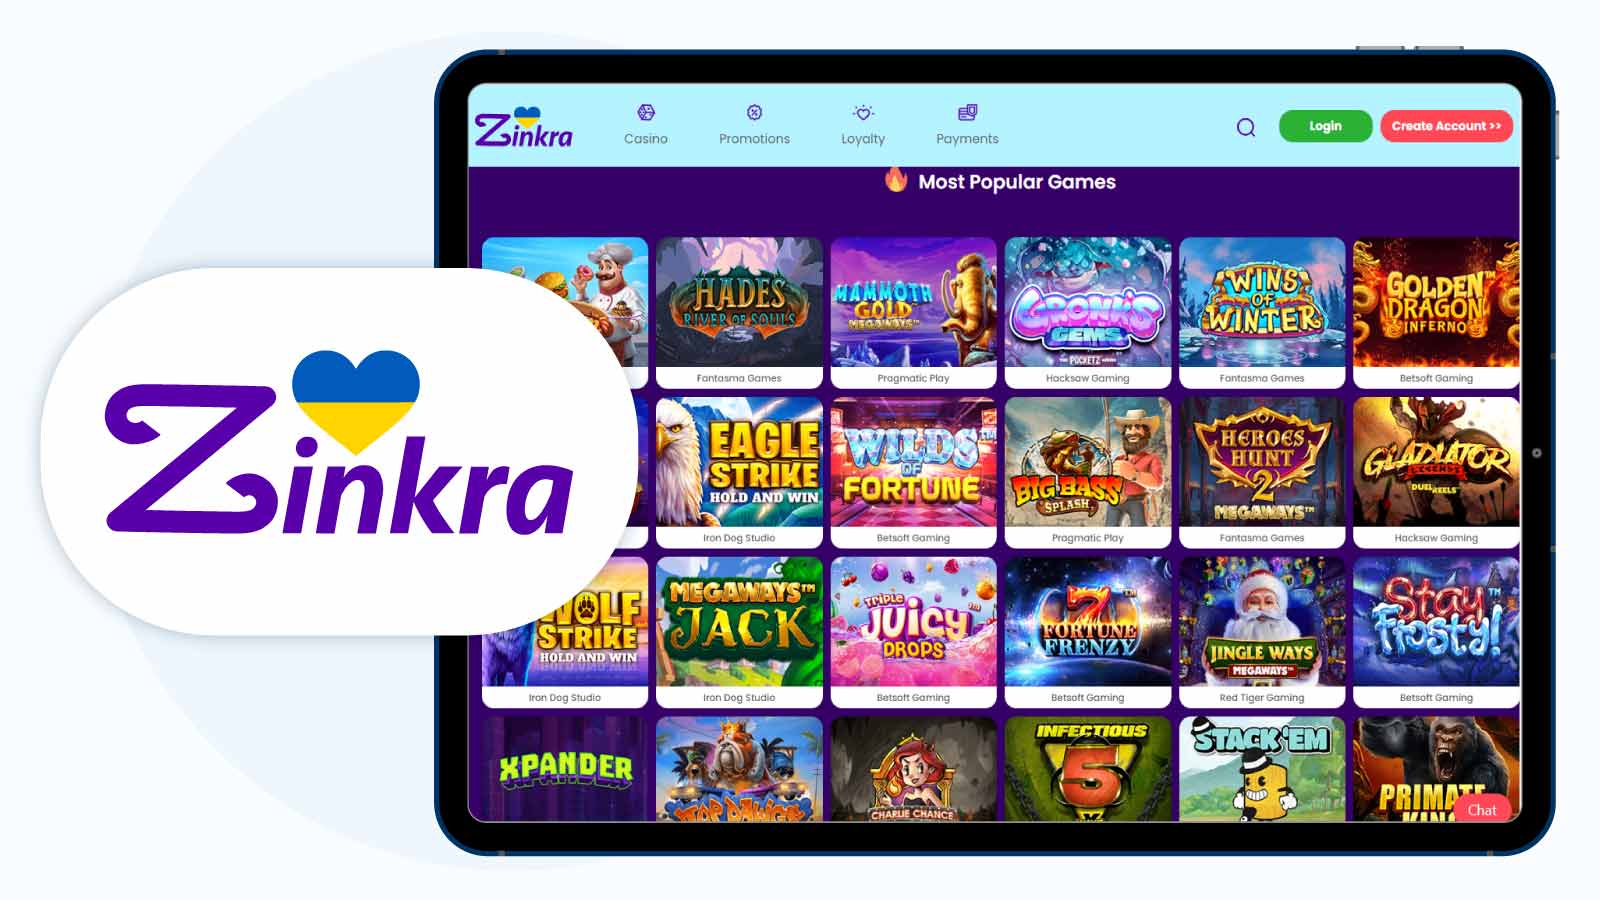 Grab-Your-10-FS-and-Enjoy-a-New-Casino-Zinkra-Casino